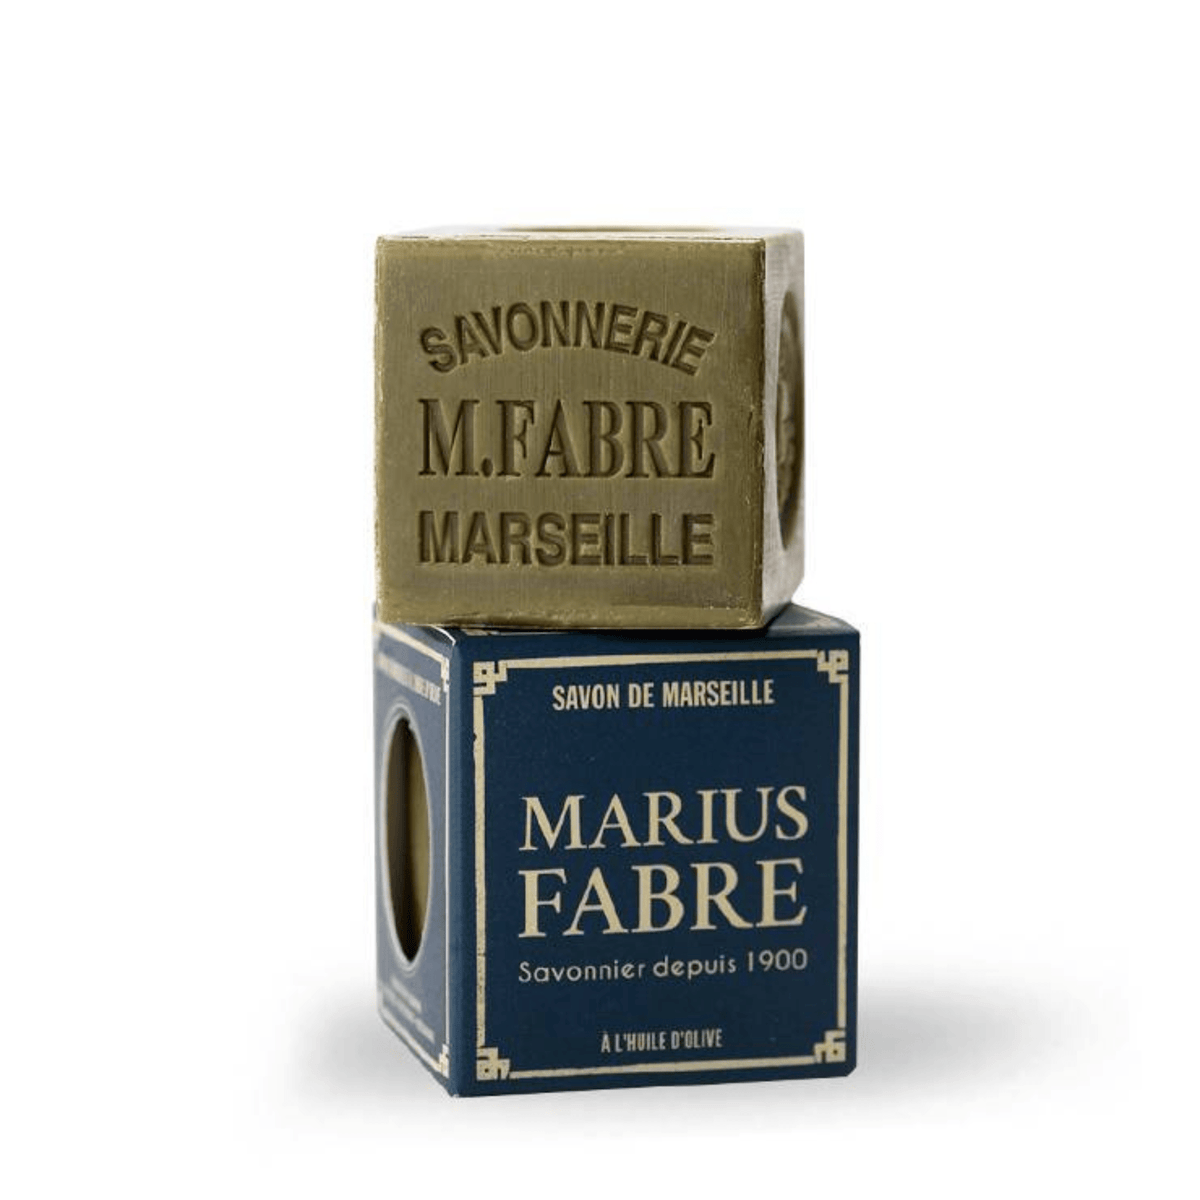 Primary Image of Olive Oil Marseille Bar Soap Cube